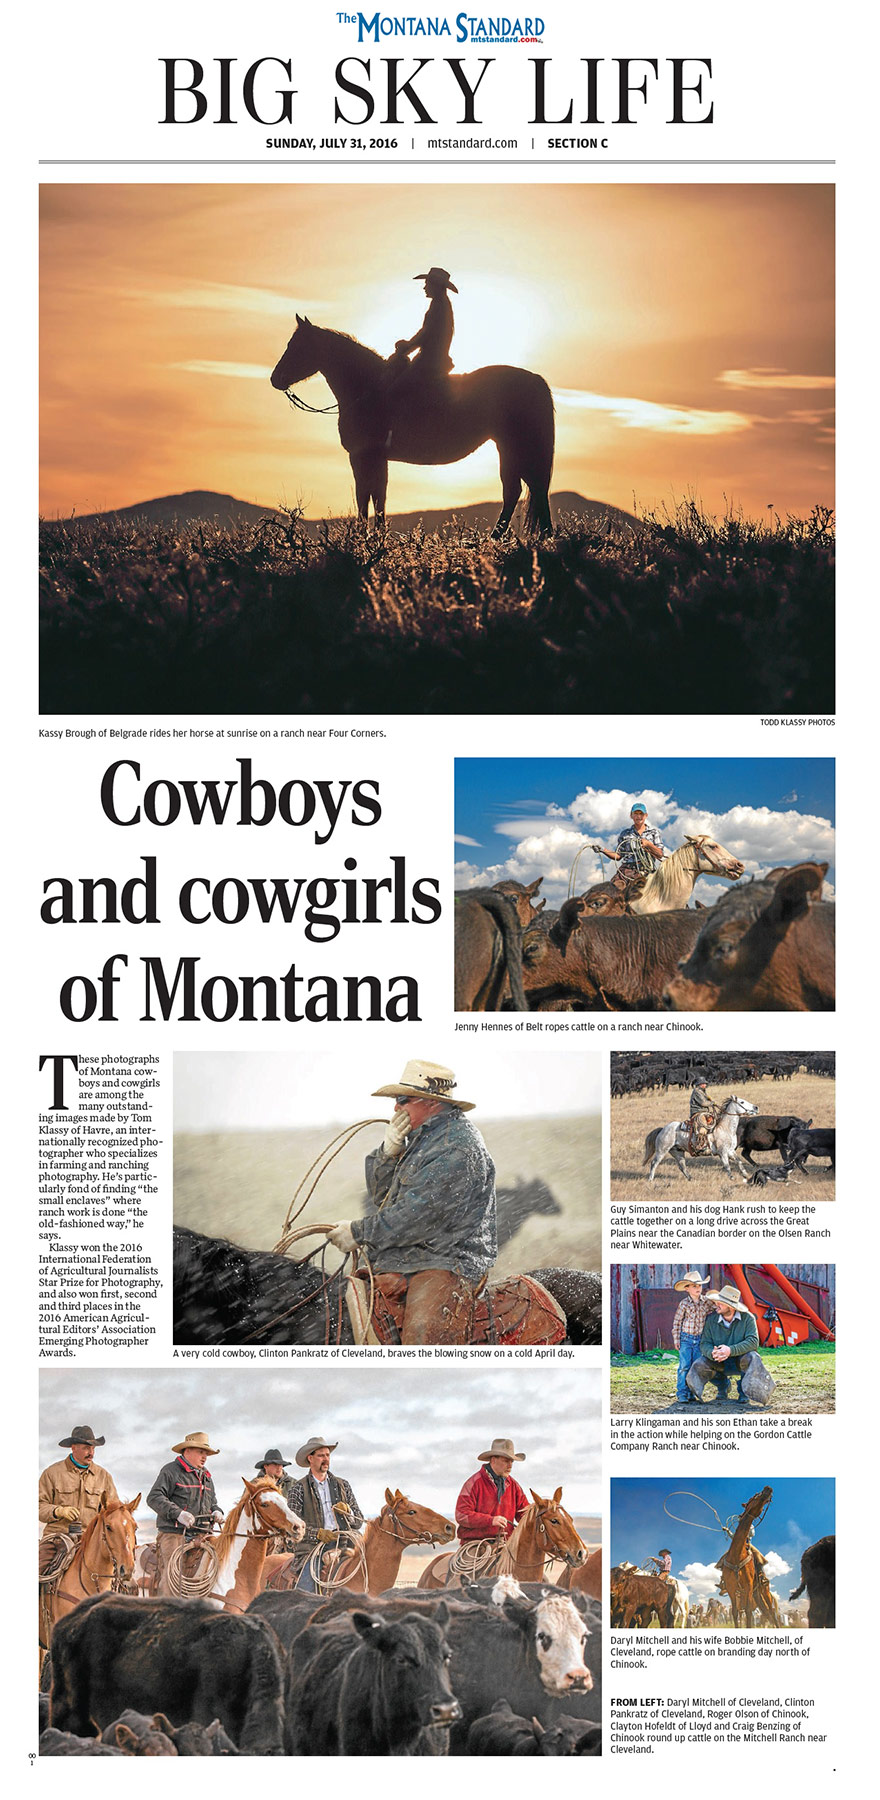 My Cowboy Photos Appeared in The Montana Standard Newspaper